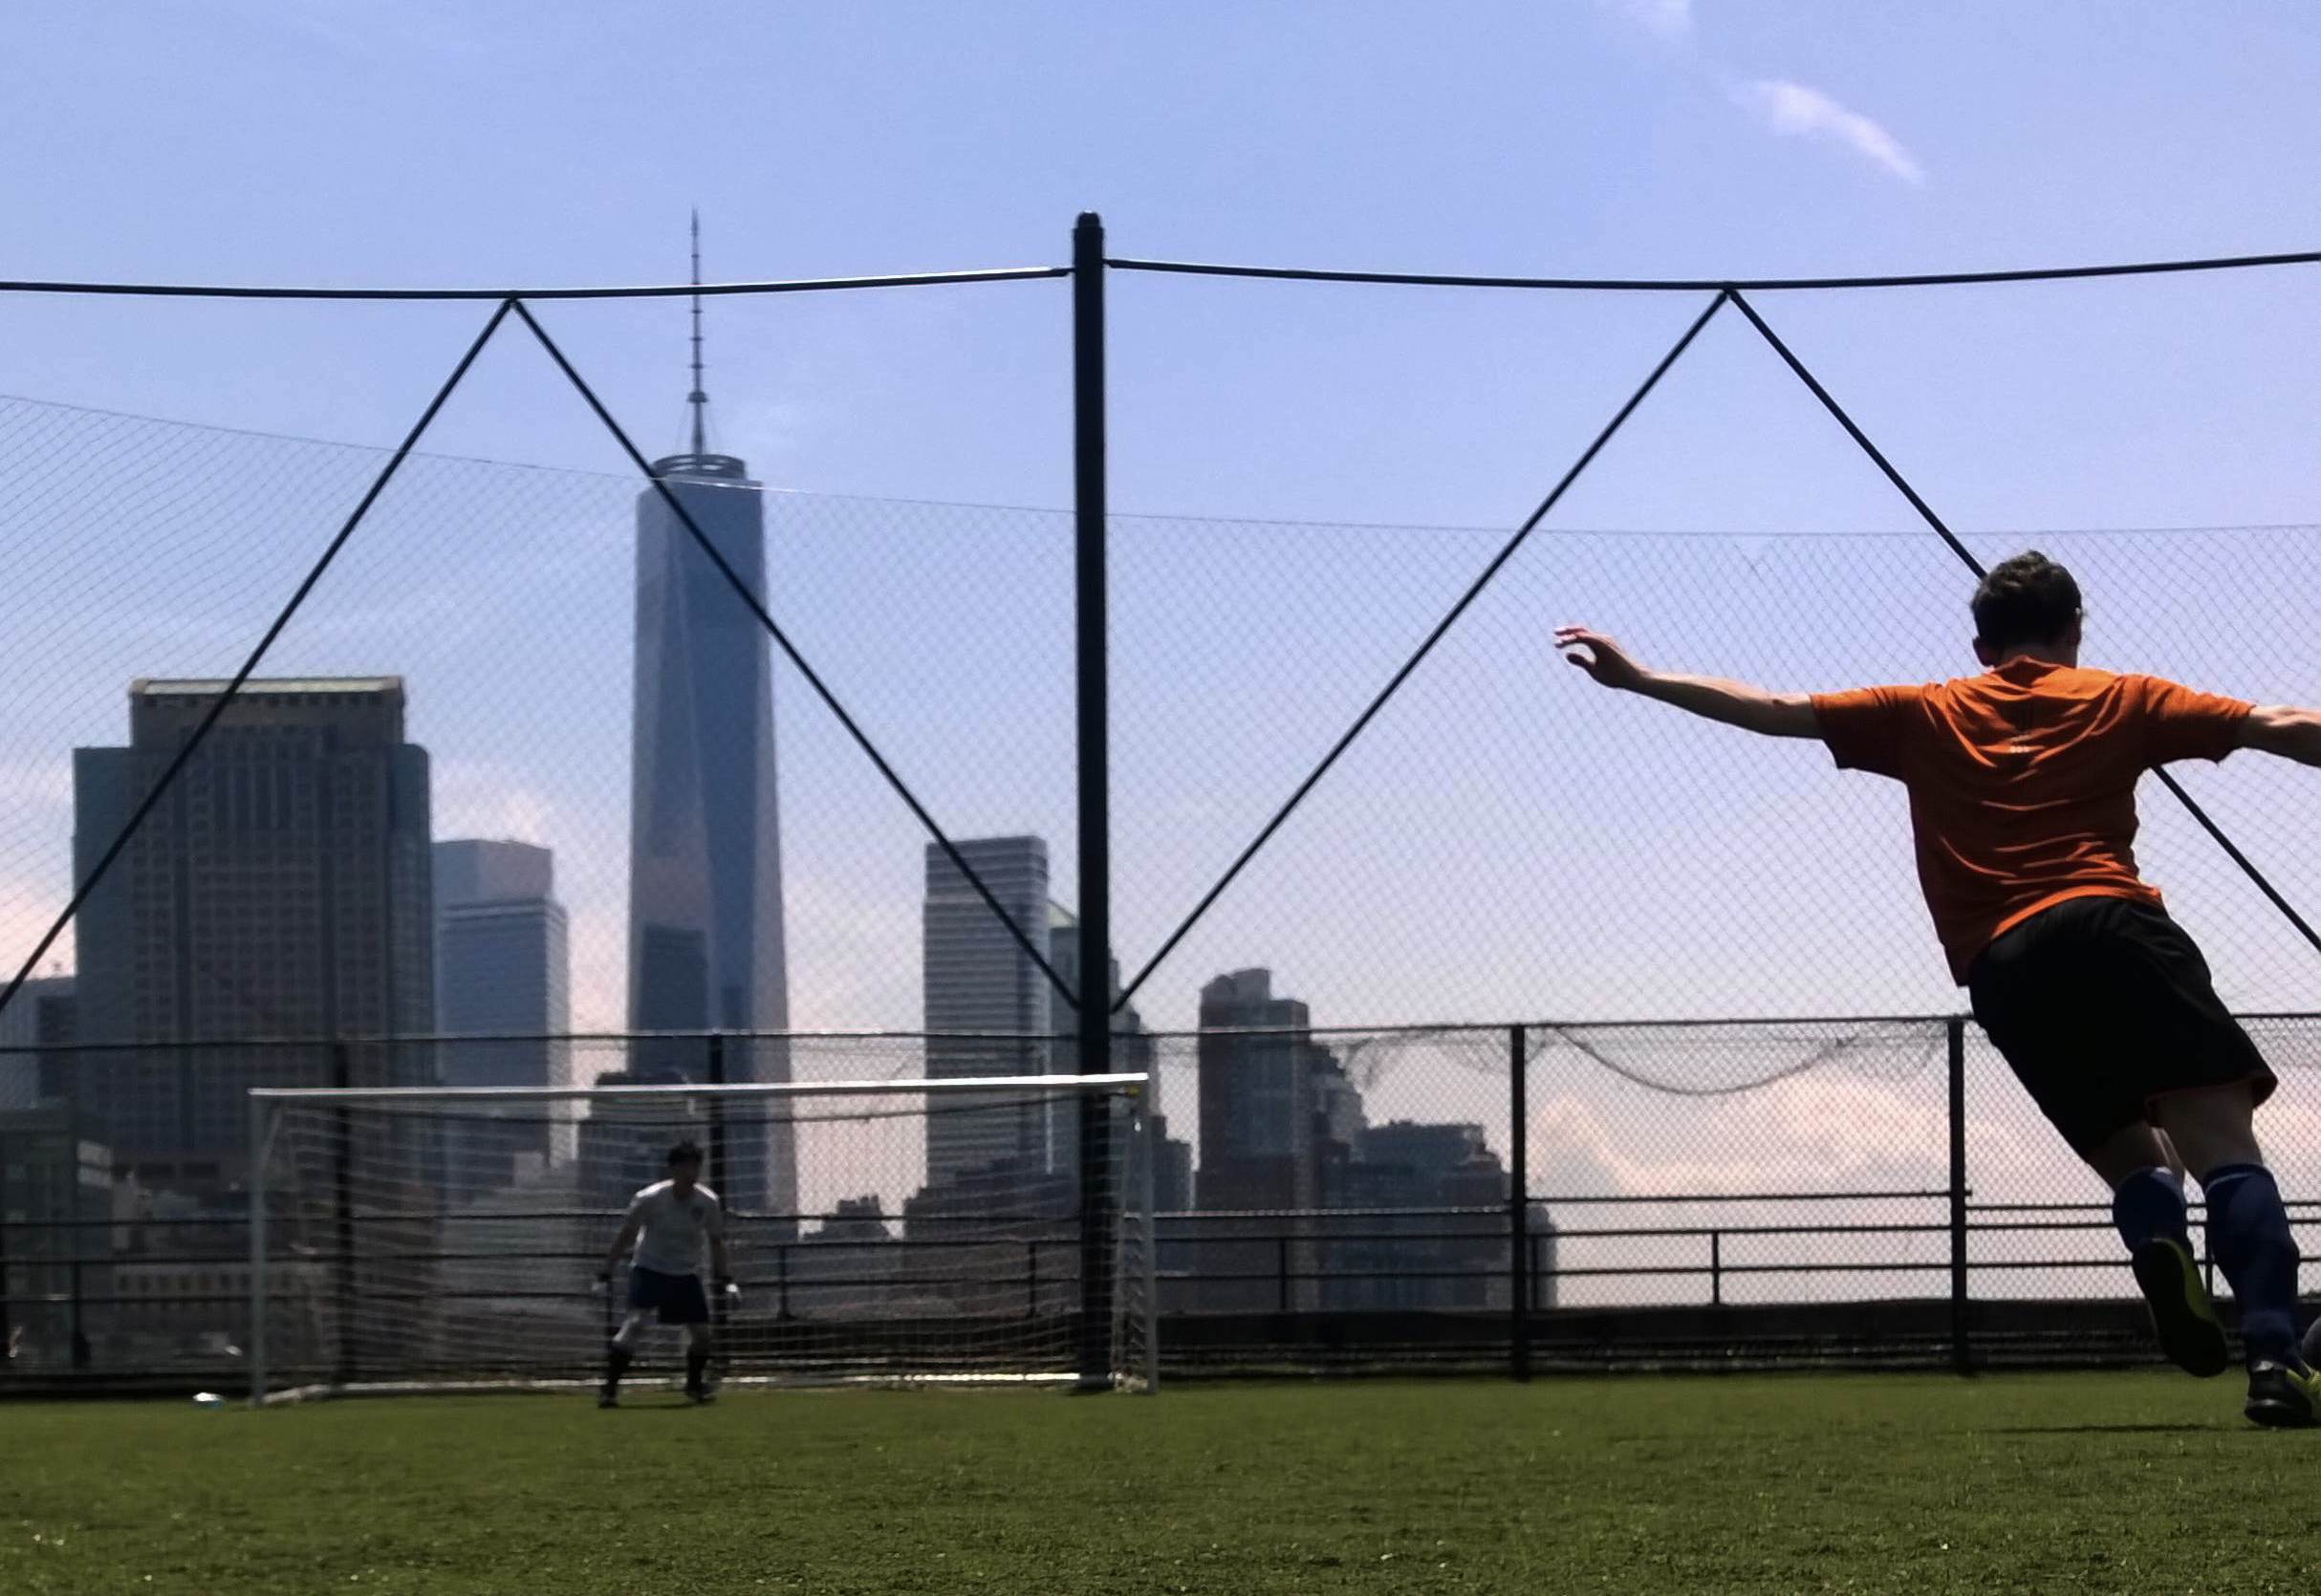 Warming up on the Pier 40 rooftop field in the footsteps of the Freedom Tower. New York, NY USA